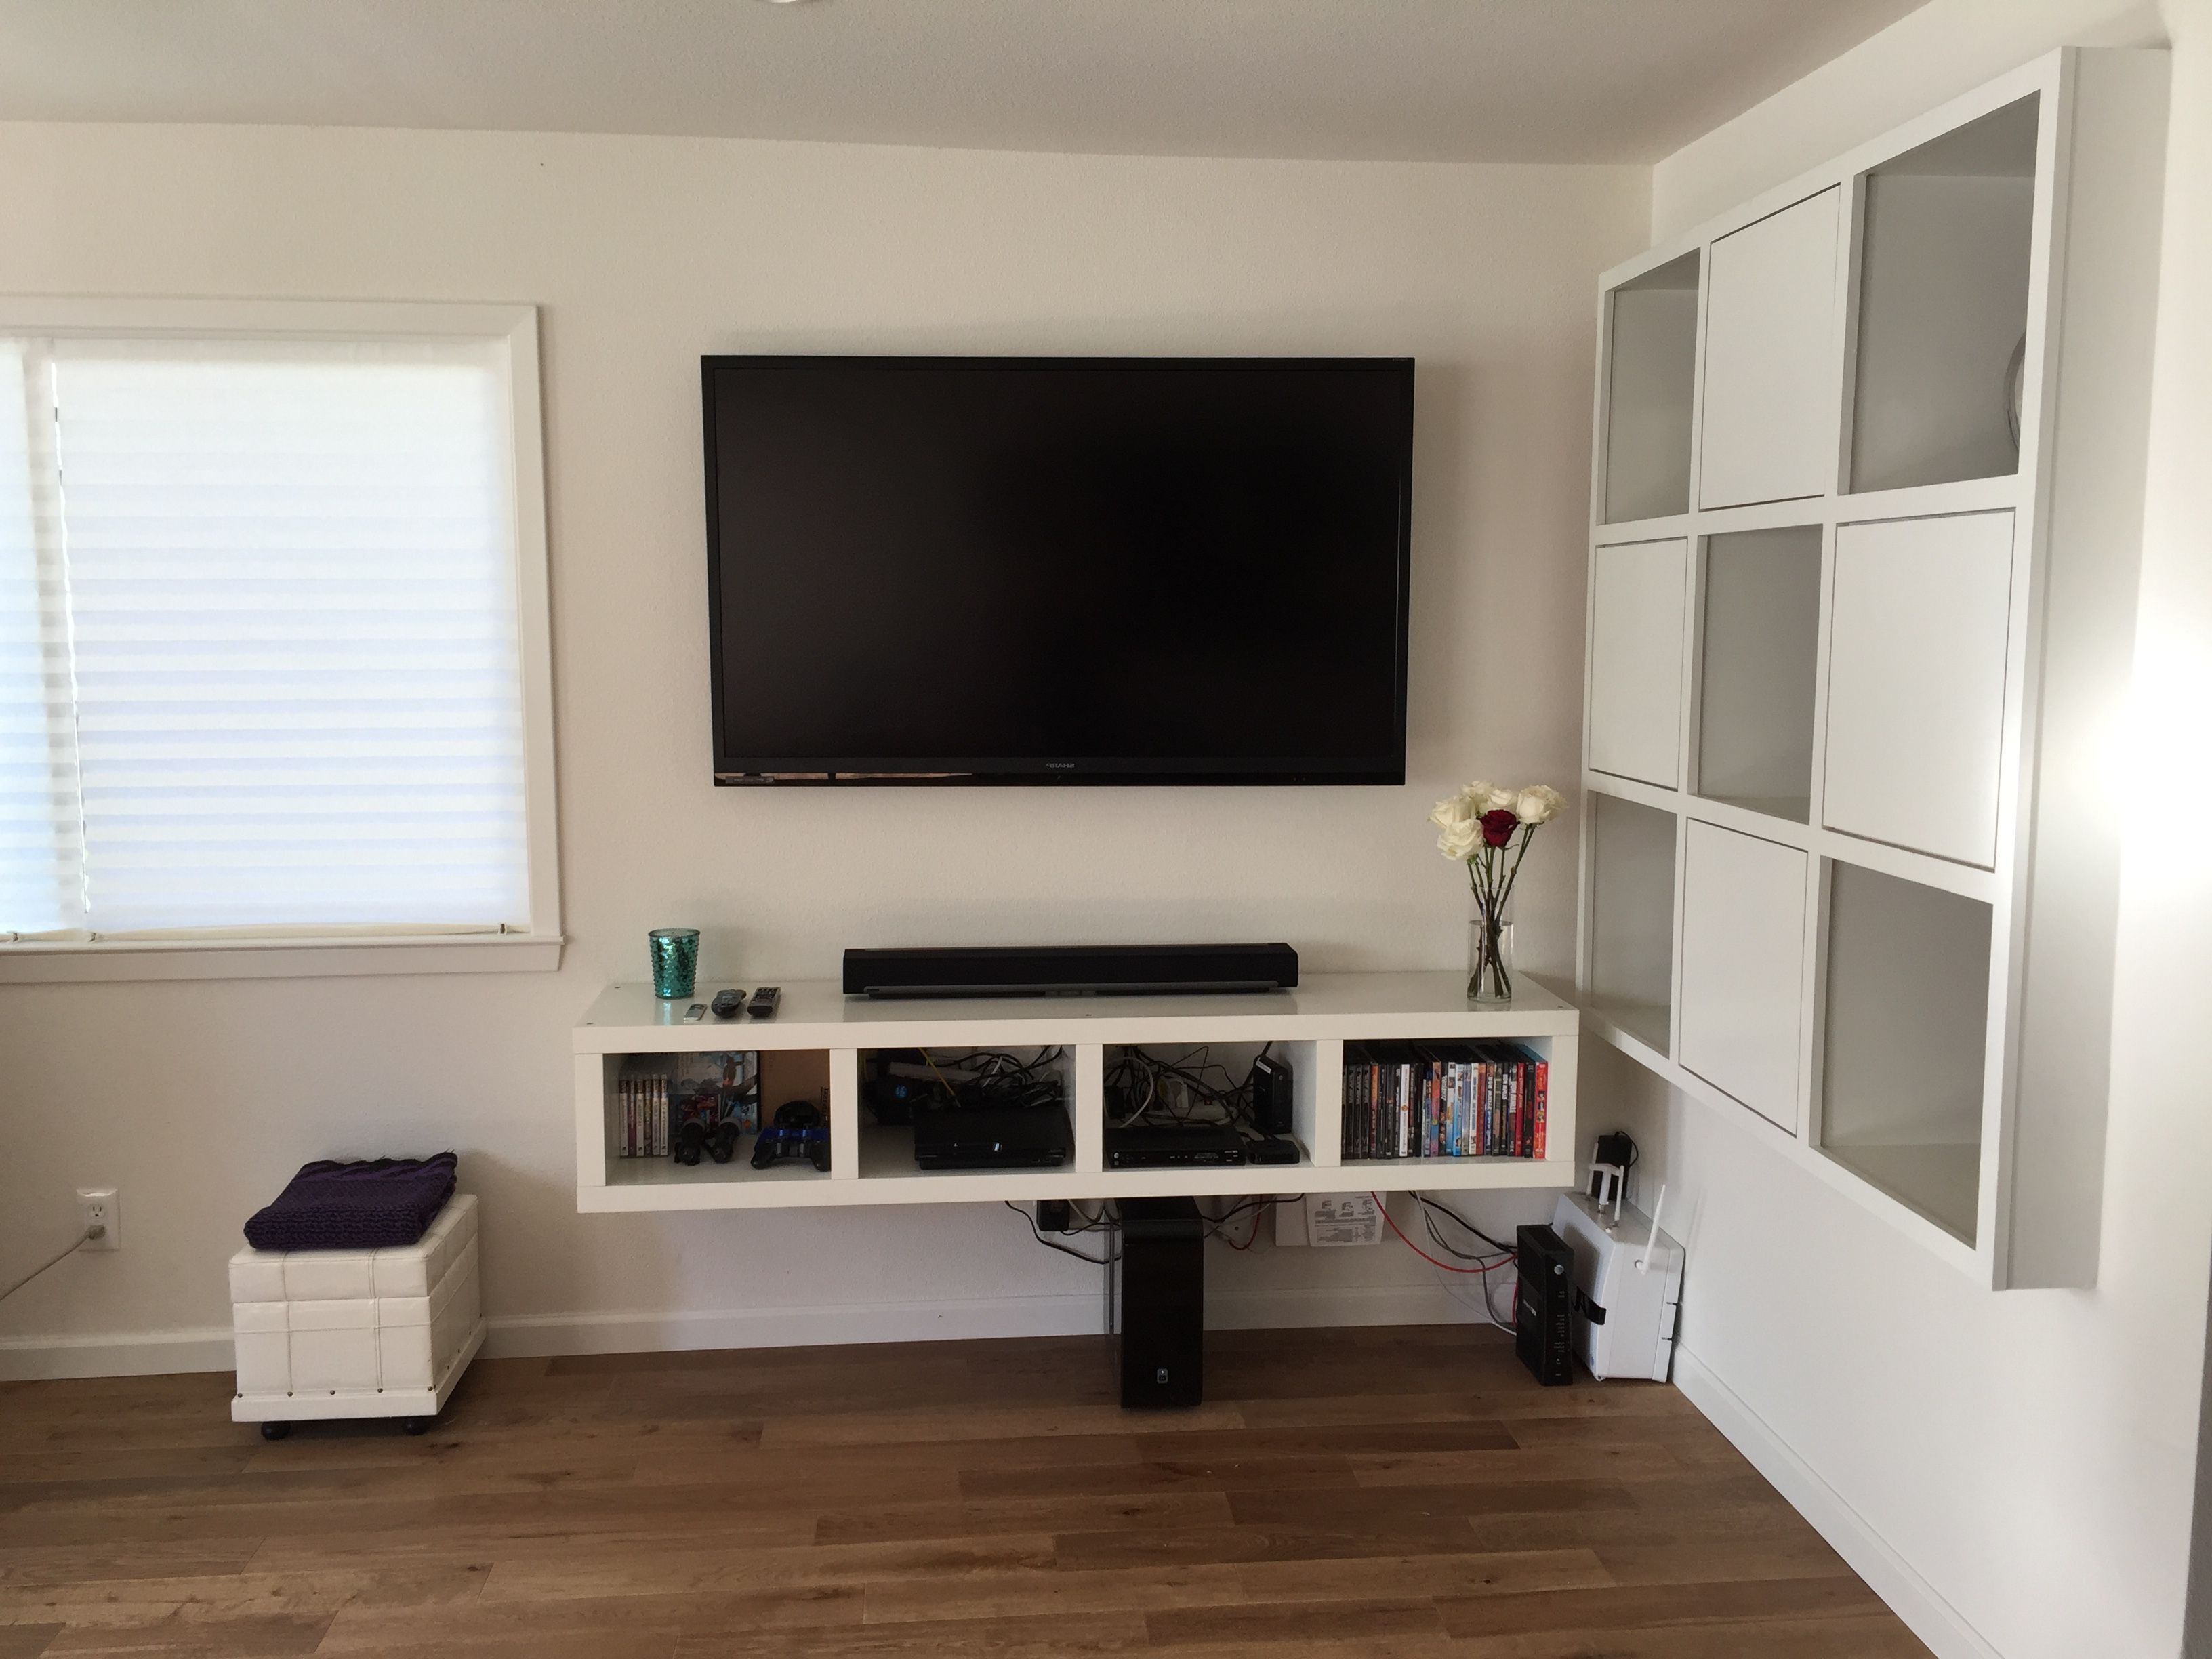 Bookshelf And Tv Stands For Widely Used Ikea Bookshelf Converted To Floating Tv Stand – Expedit – Lack (View 17 of 20)